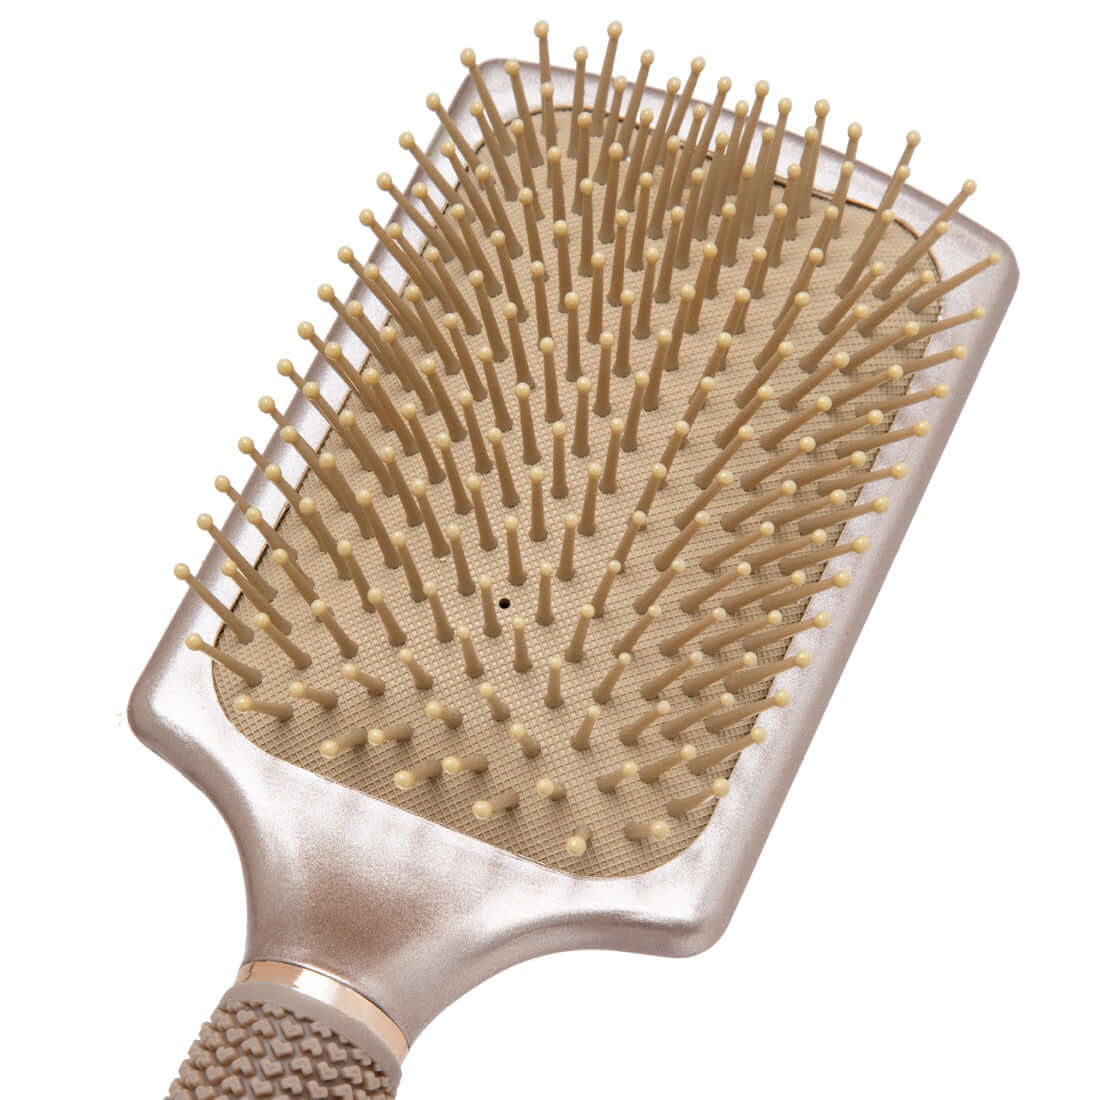 Zoomed in view TYME Paddle Hair Brush showing comfort nylon bristles on the cushioned head.